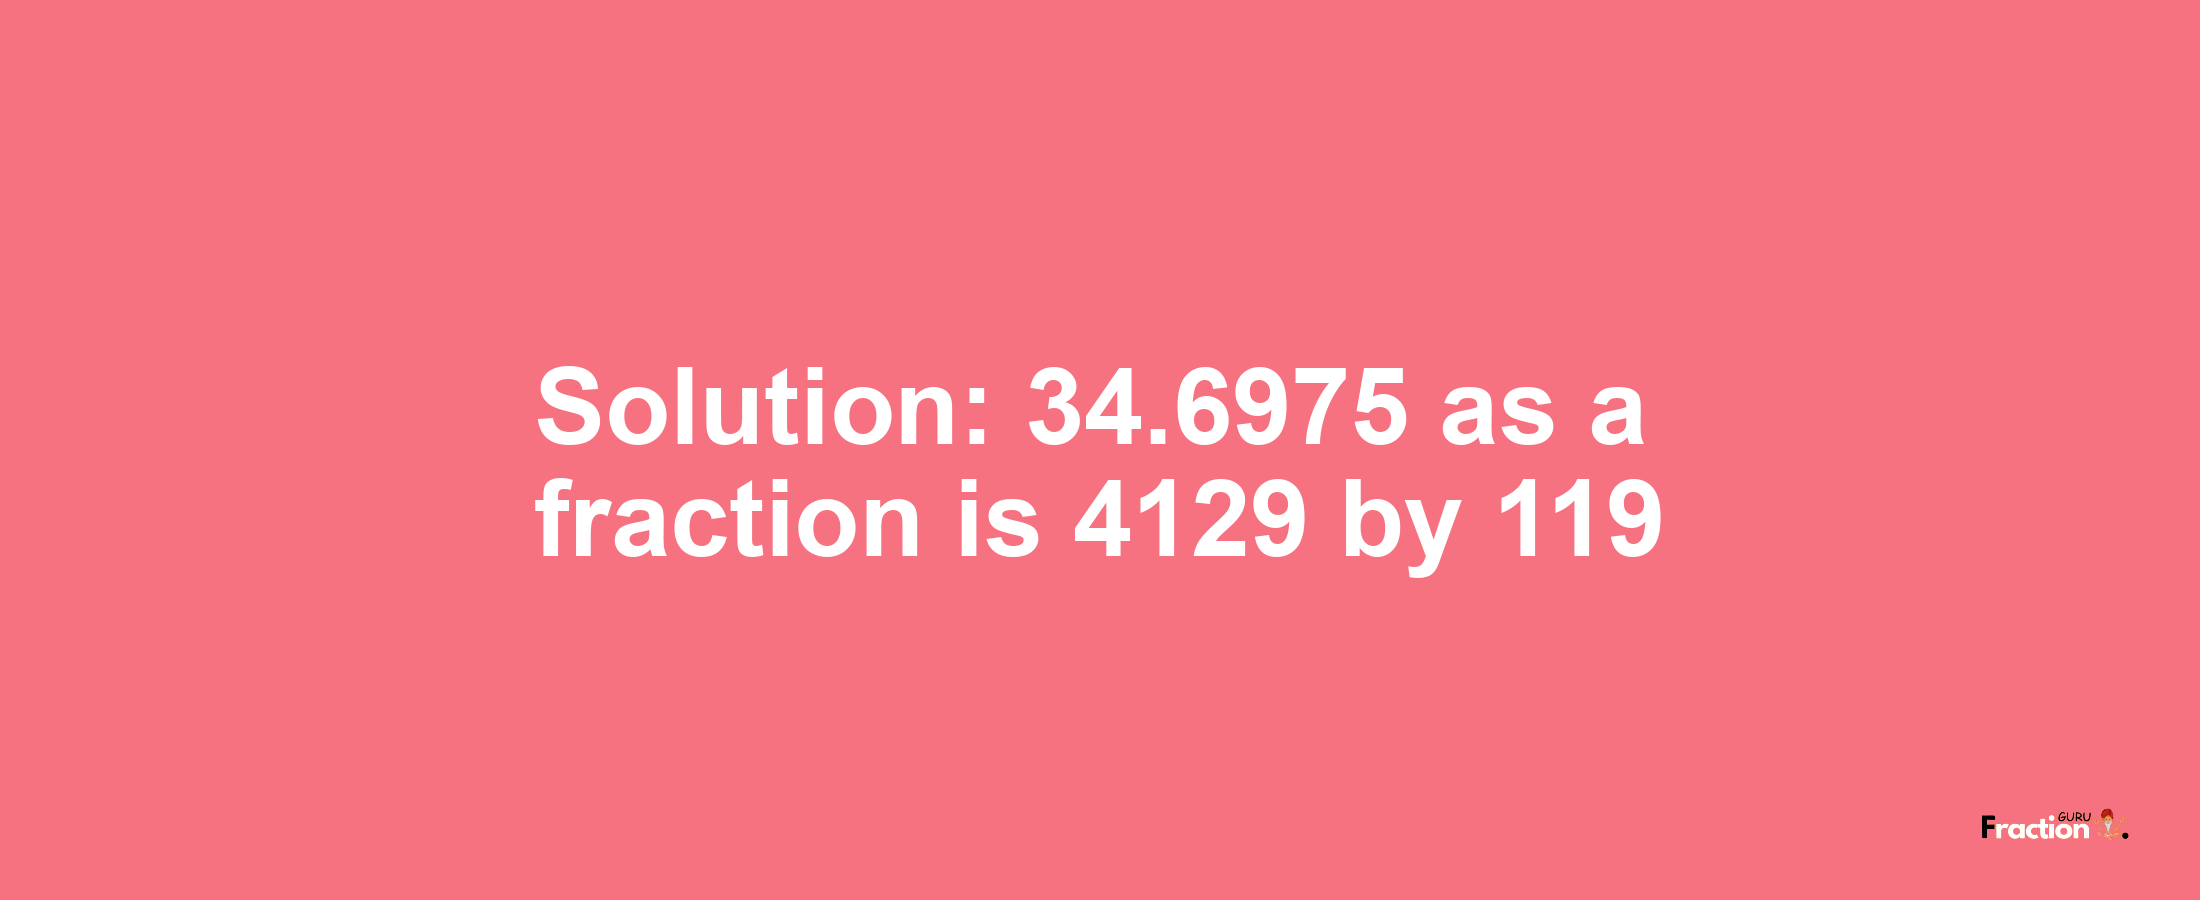 Solution:34.6975 as a fraction is 4129/119